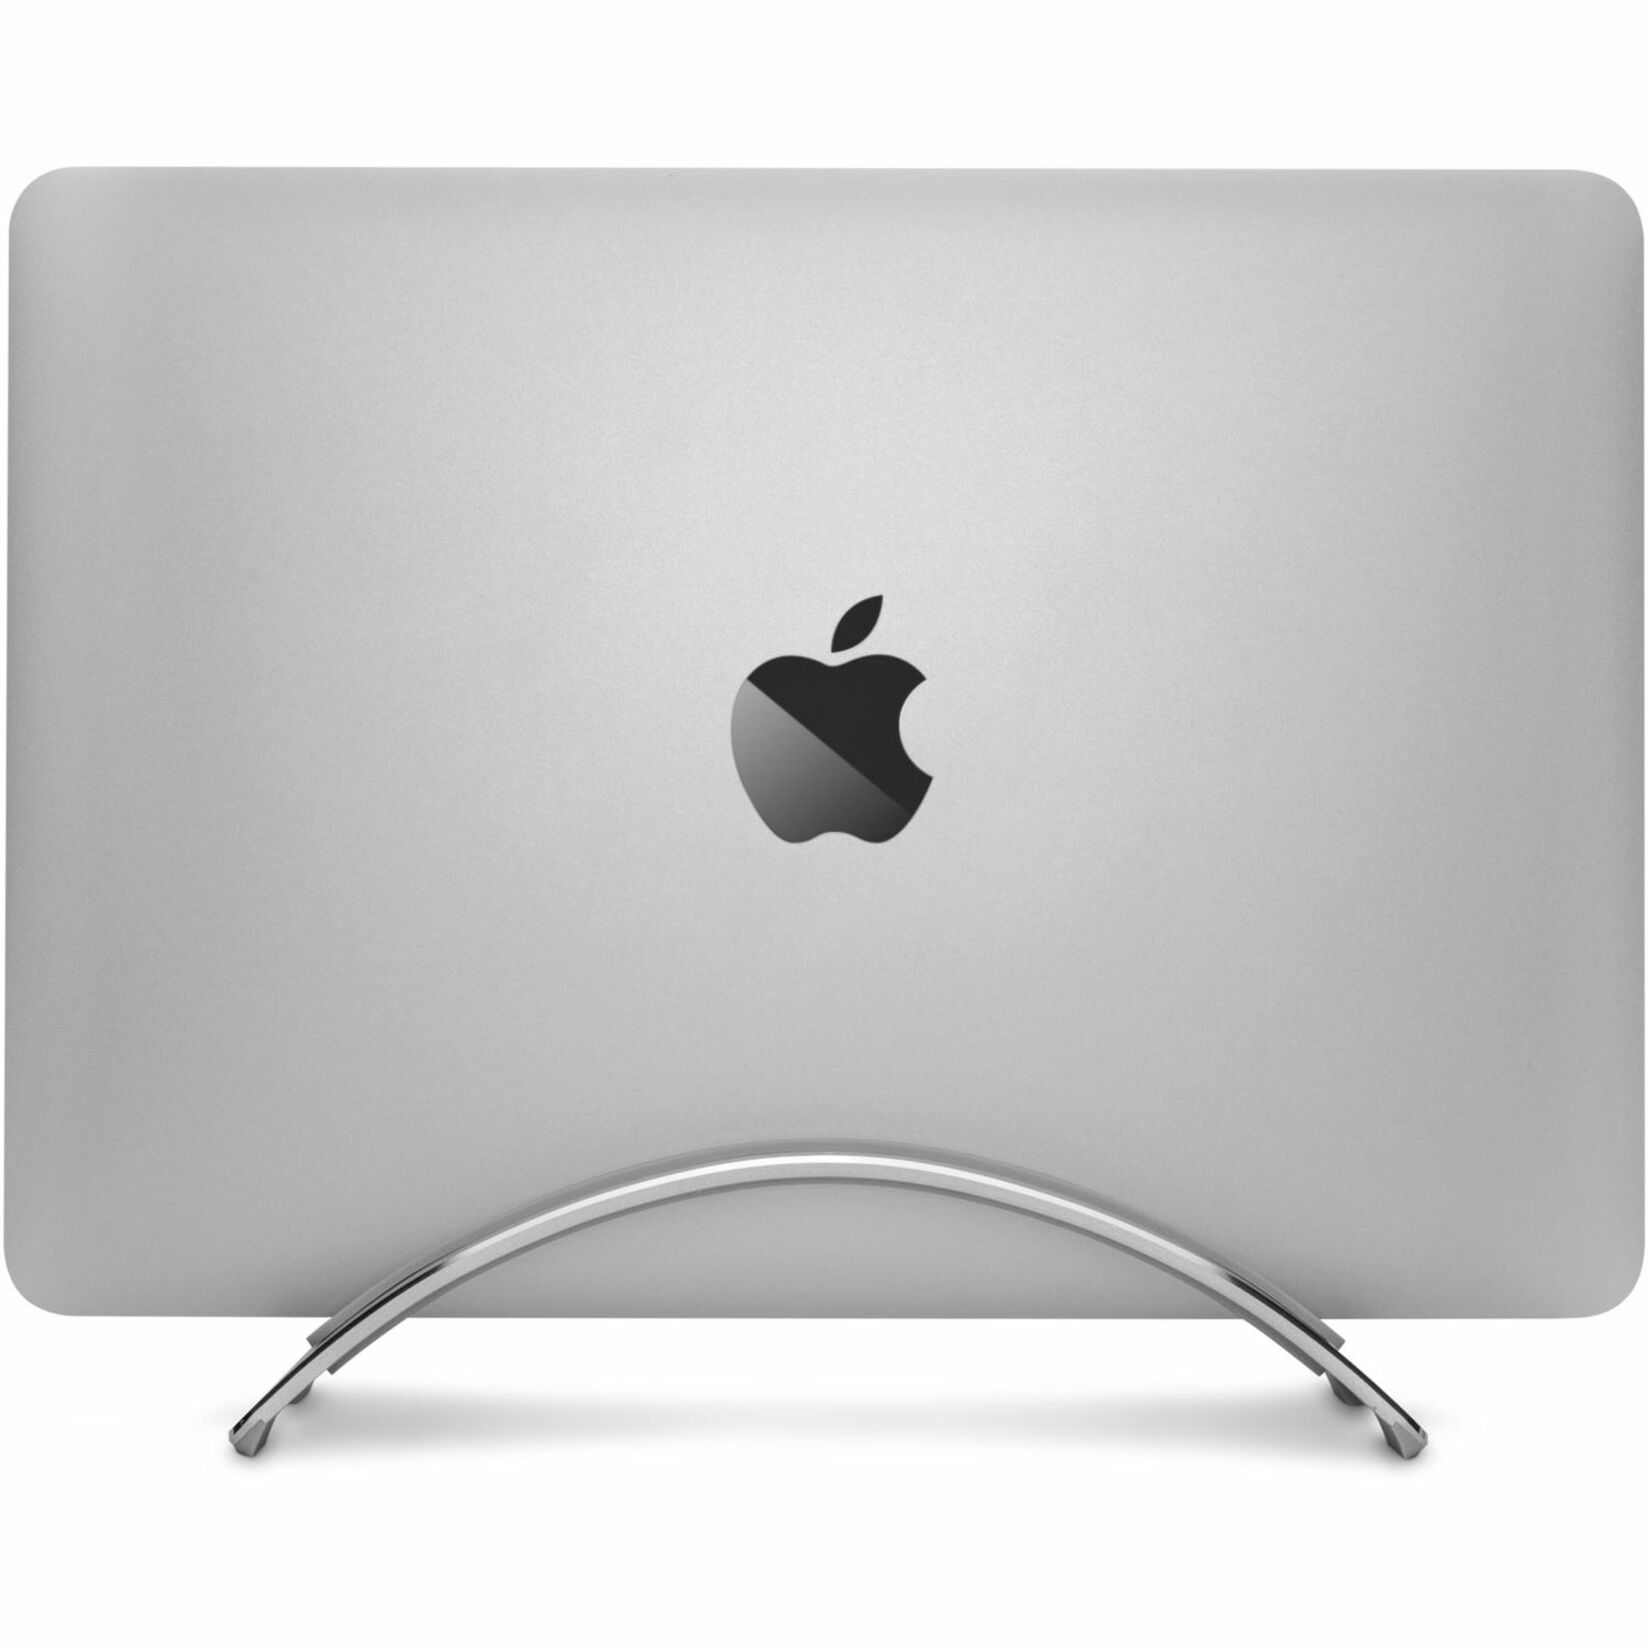 Twelve South 12-2004 BookArc for MacBook, Notebook Stand, Comfortable, Silver